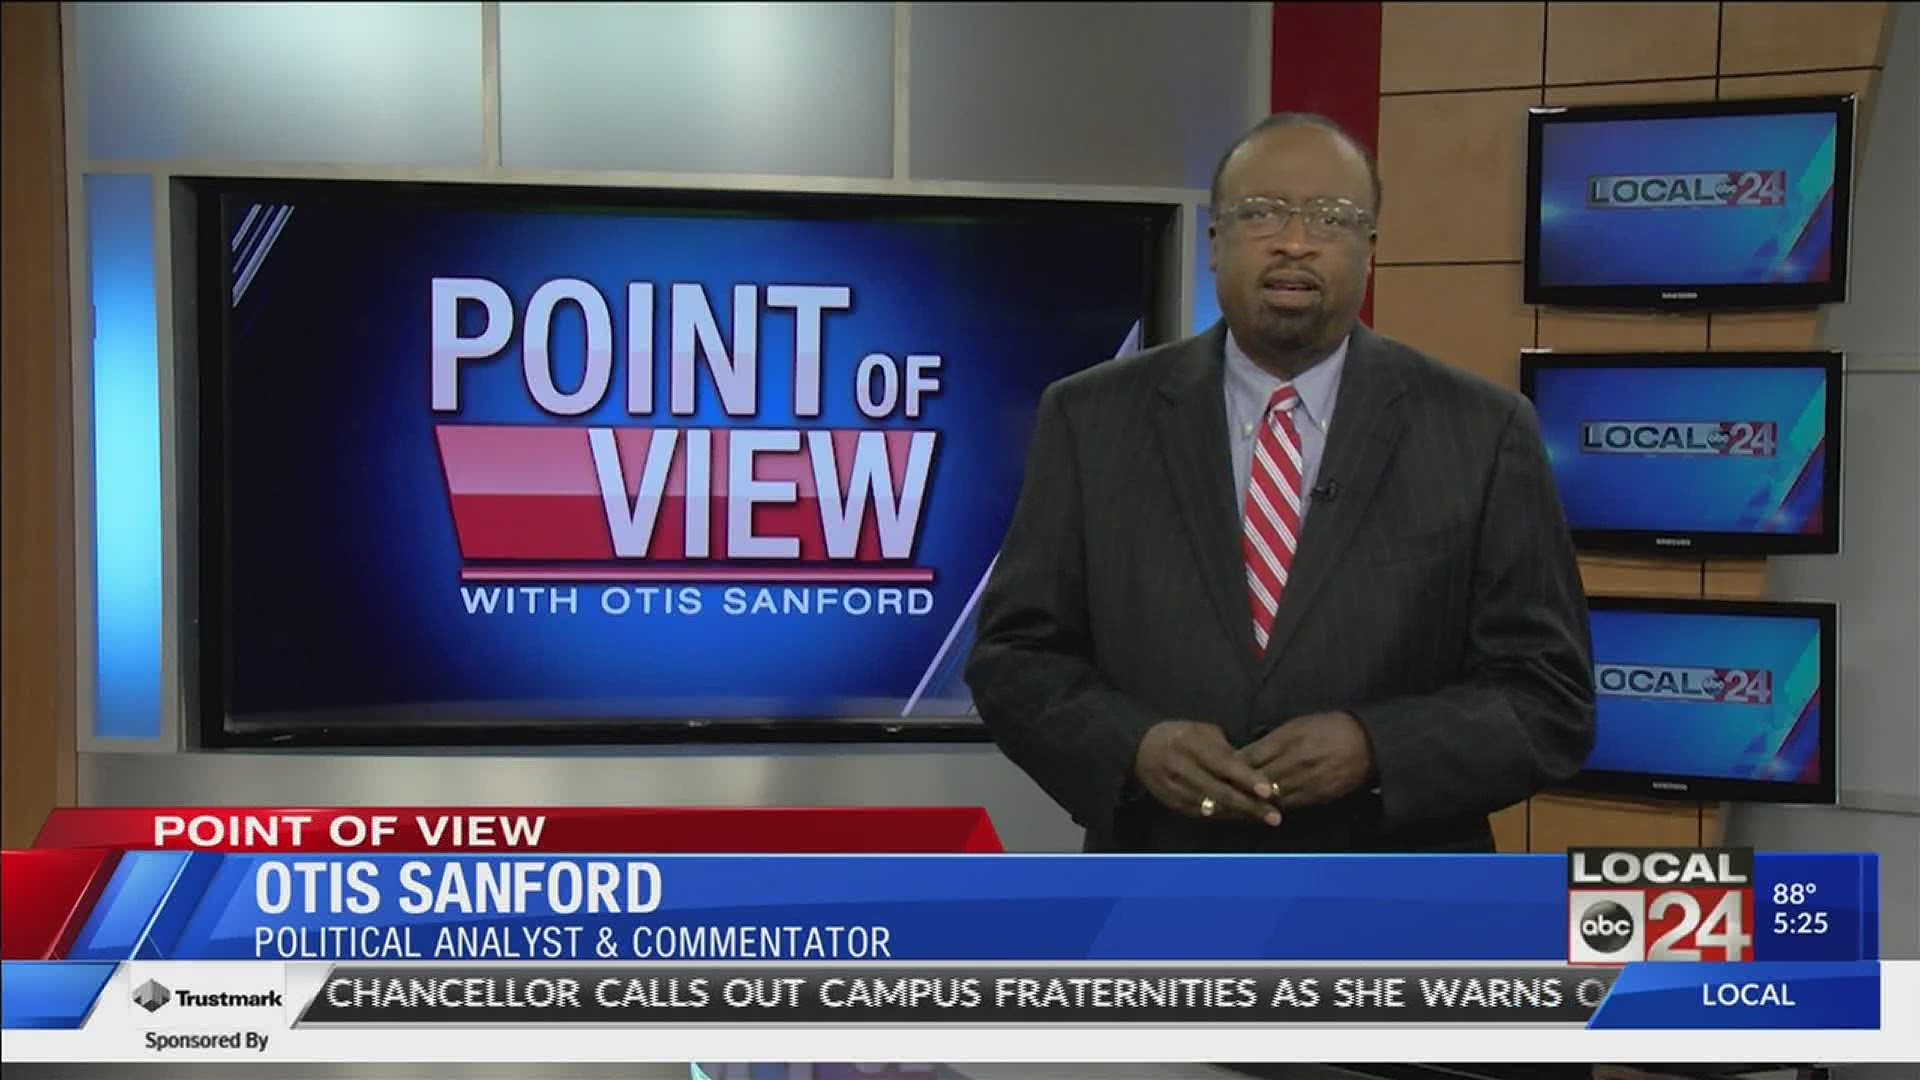 Local 24 News political analyst and commentator Otis Sanford shares his point of view on the Collierville Town Square Confederate monument.